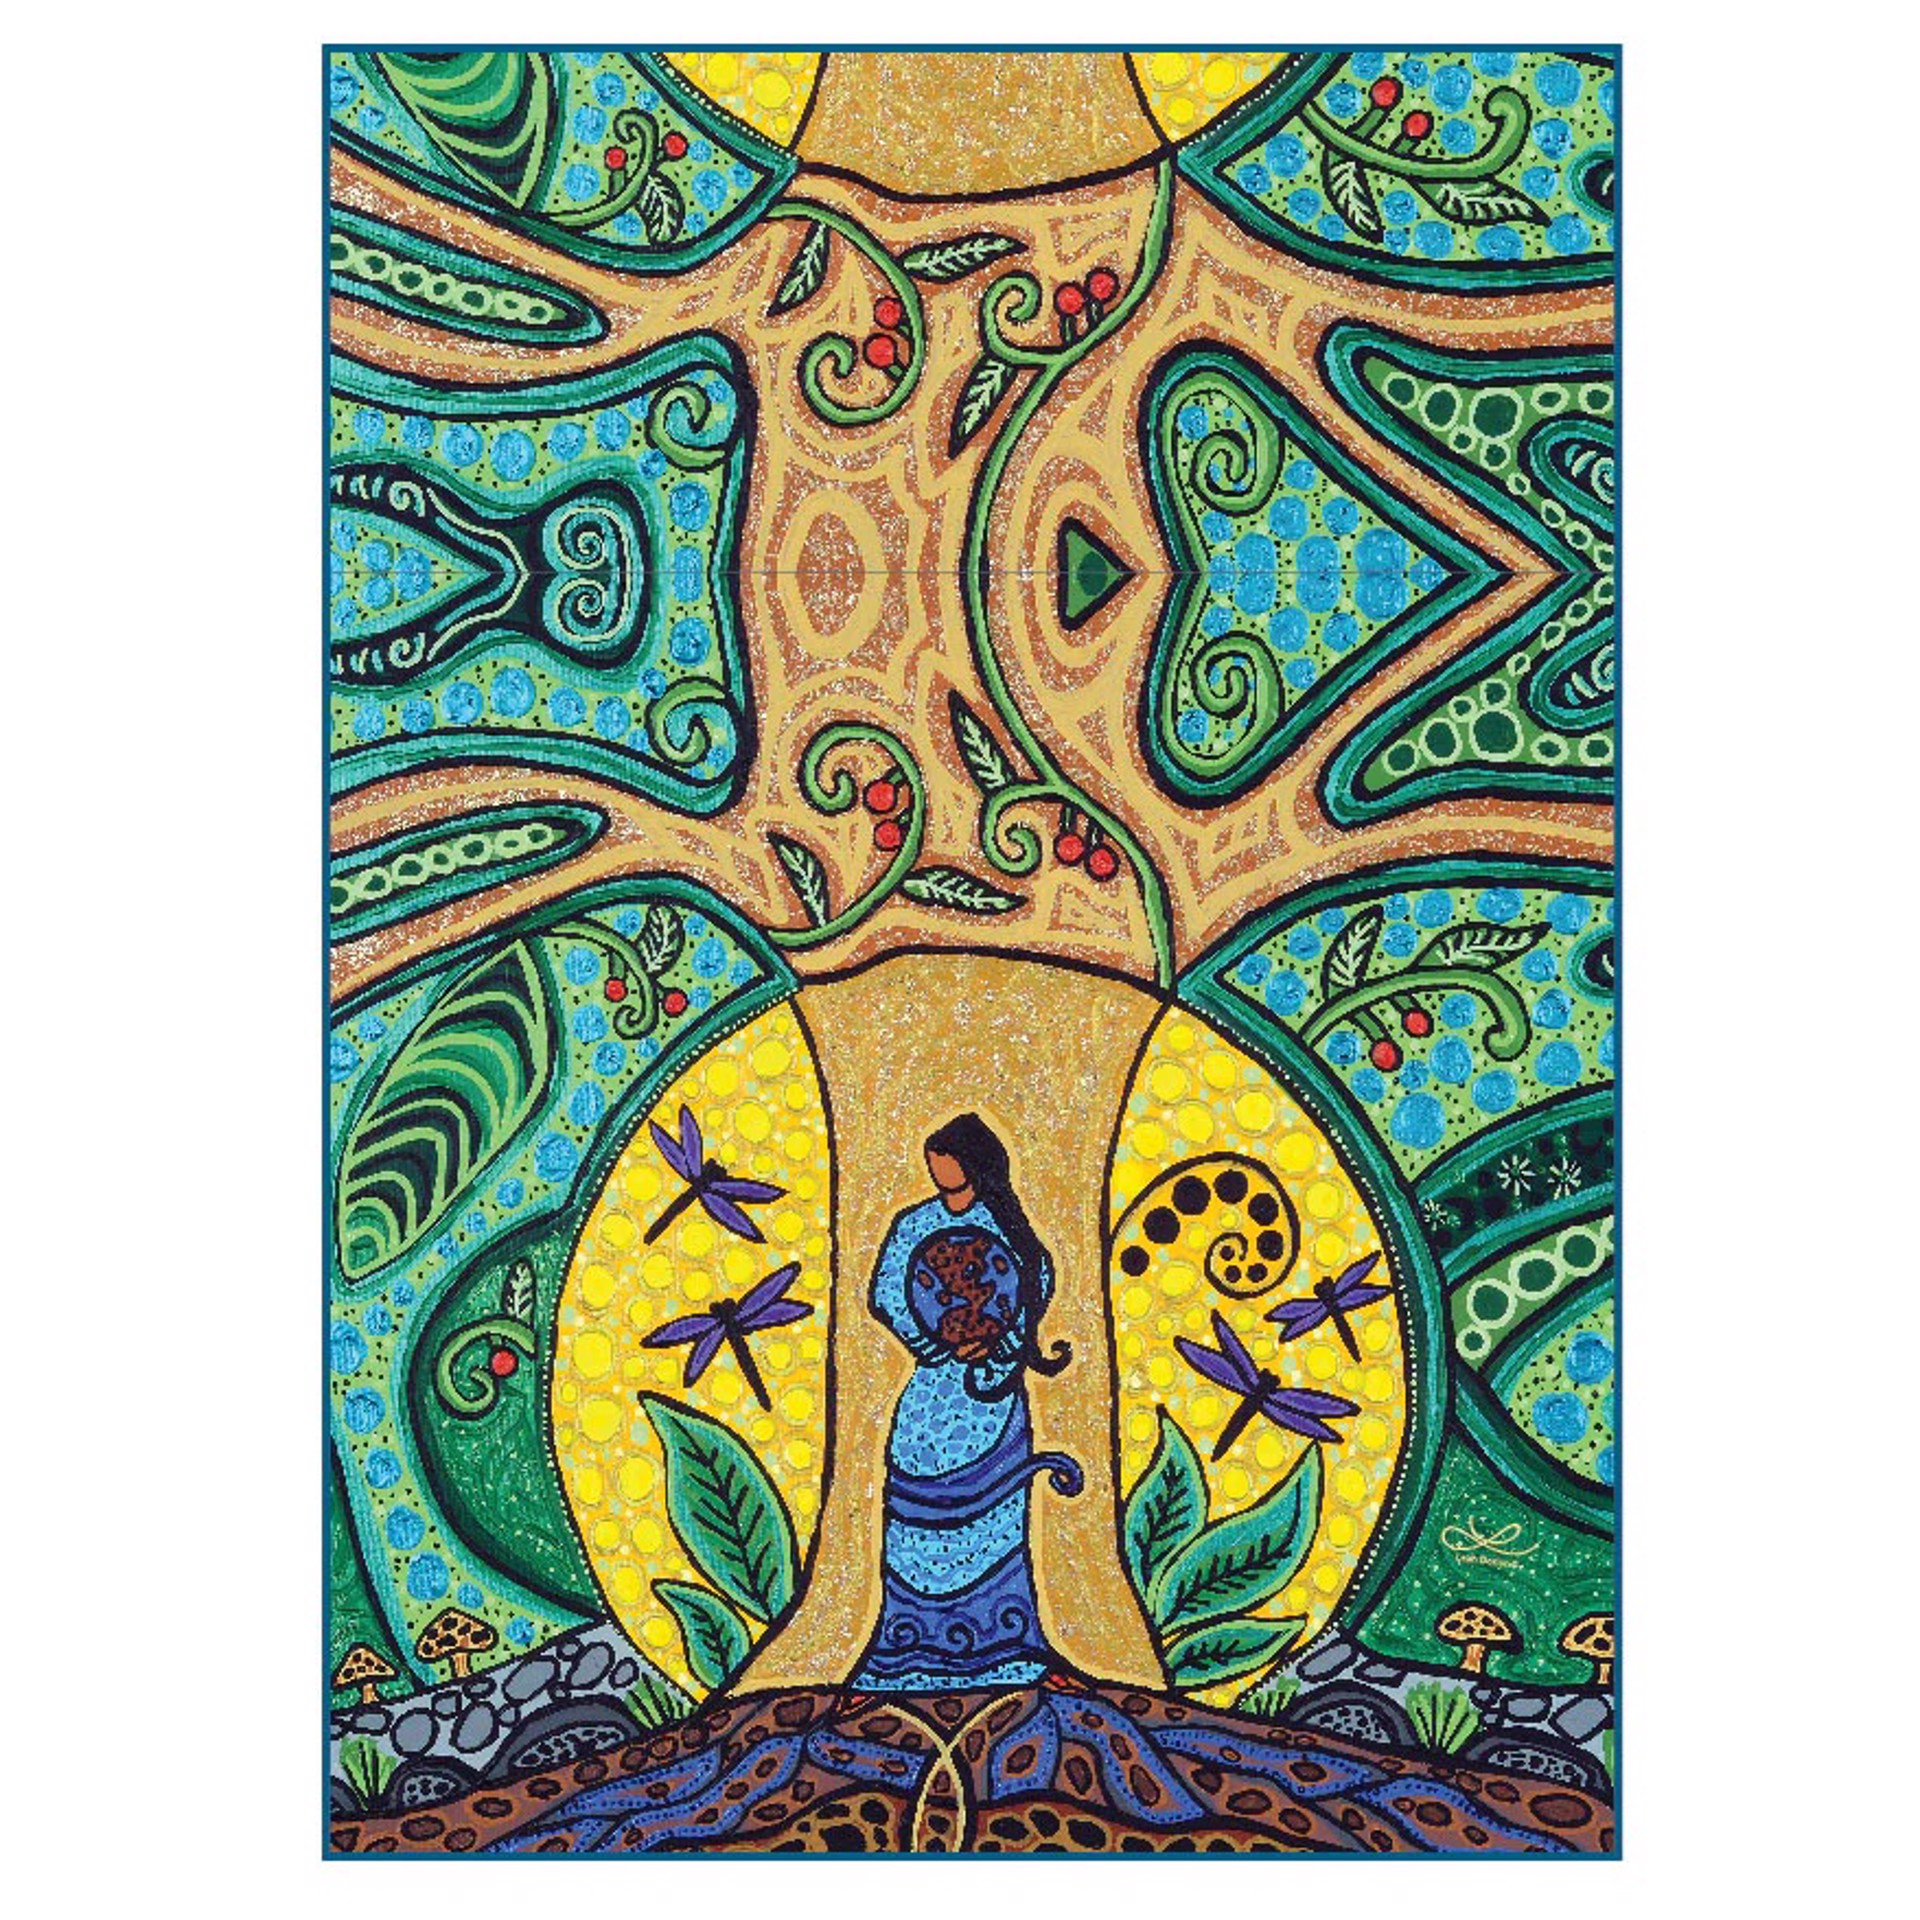 Strong Earth Woman Microfibre Towel by Leah Dorion